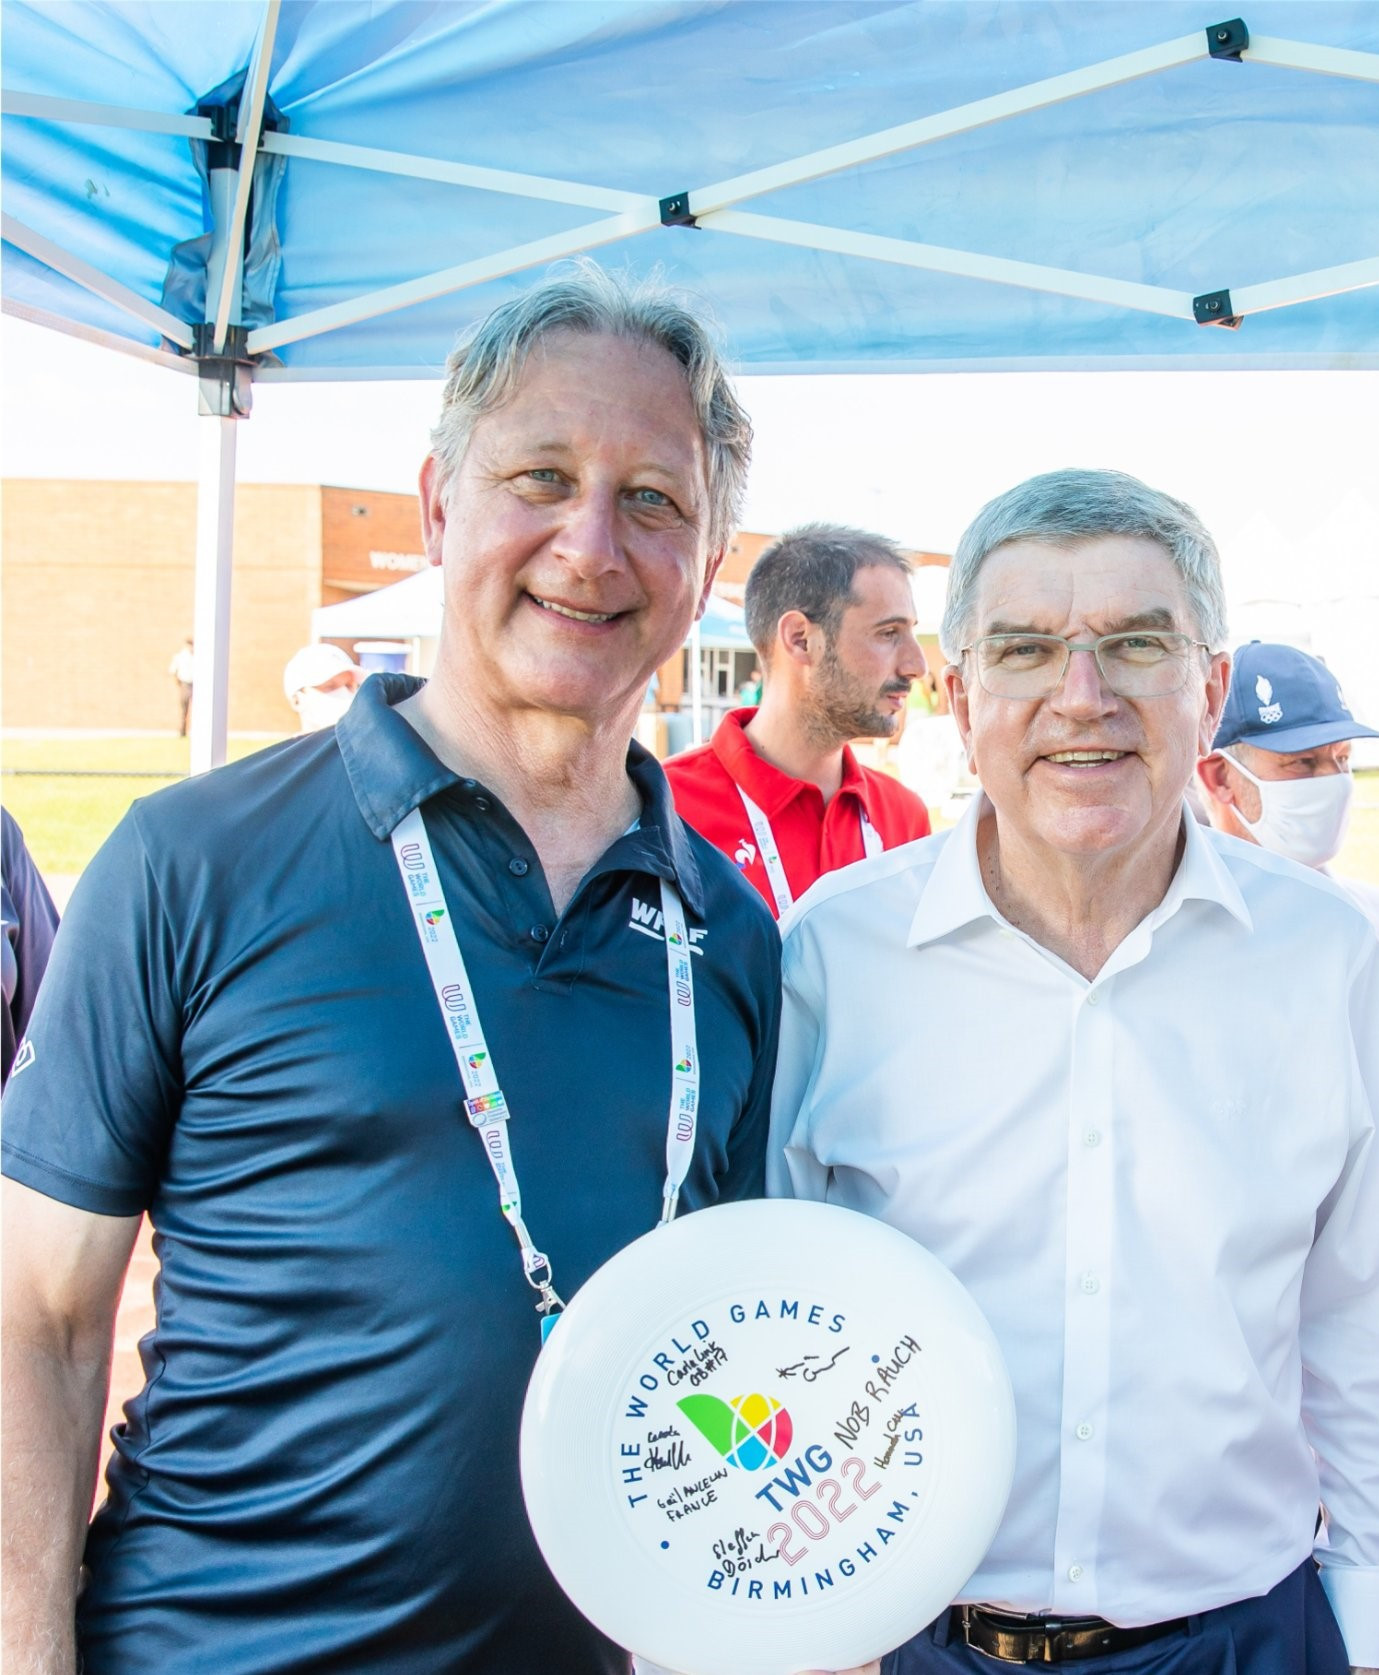 Flying Disc: Olympic Games are part of our strategic plan